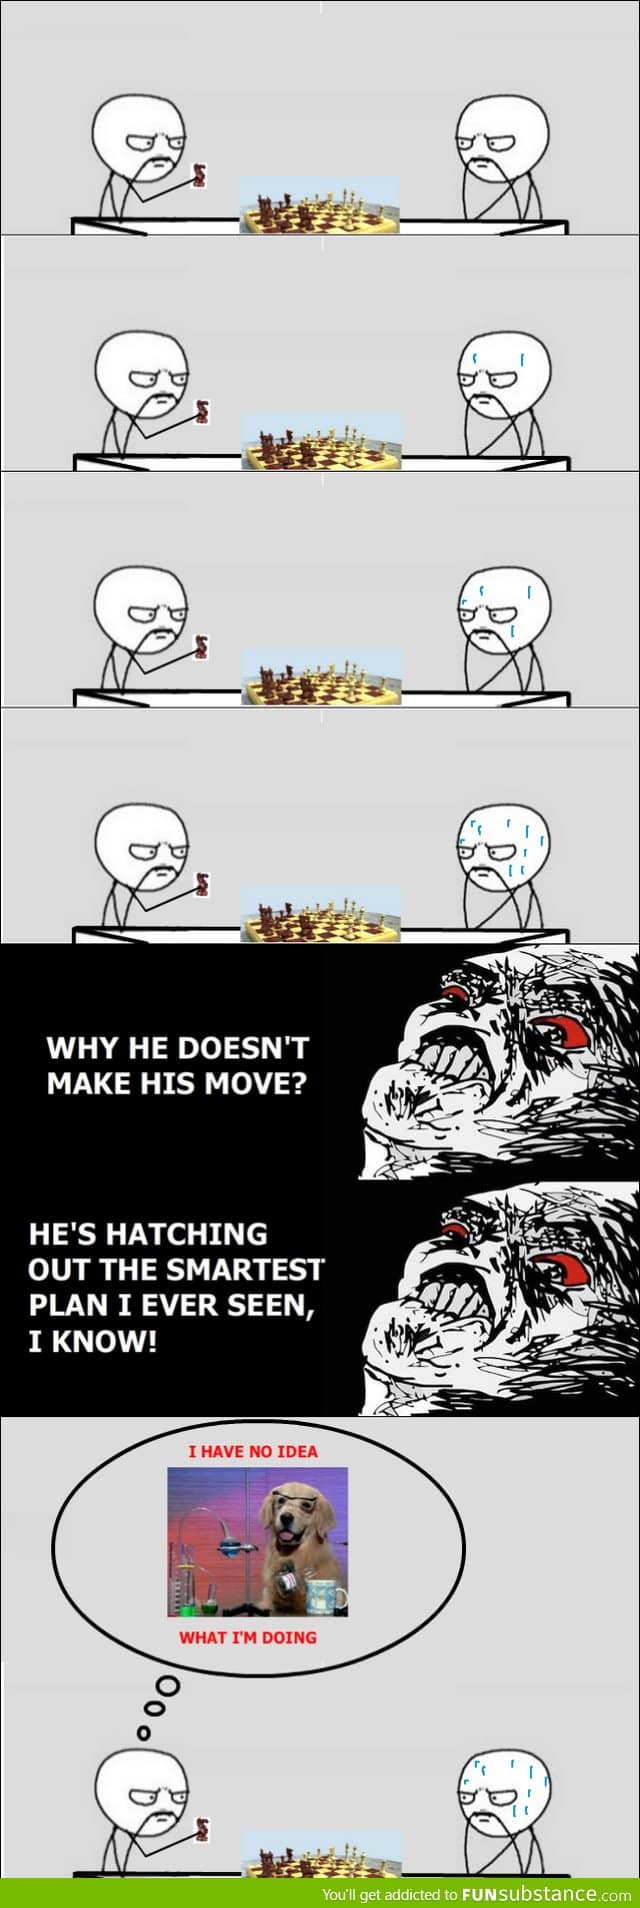 When playing chess